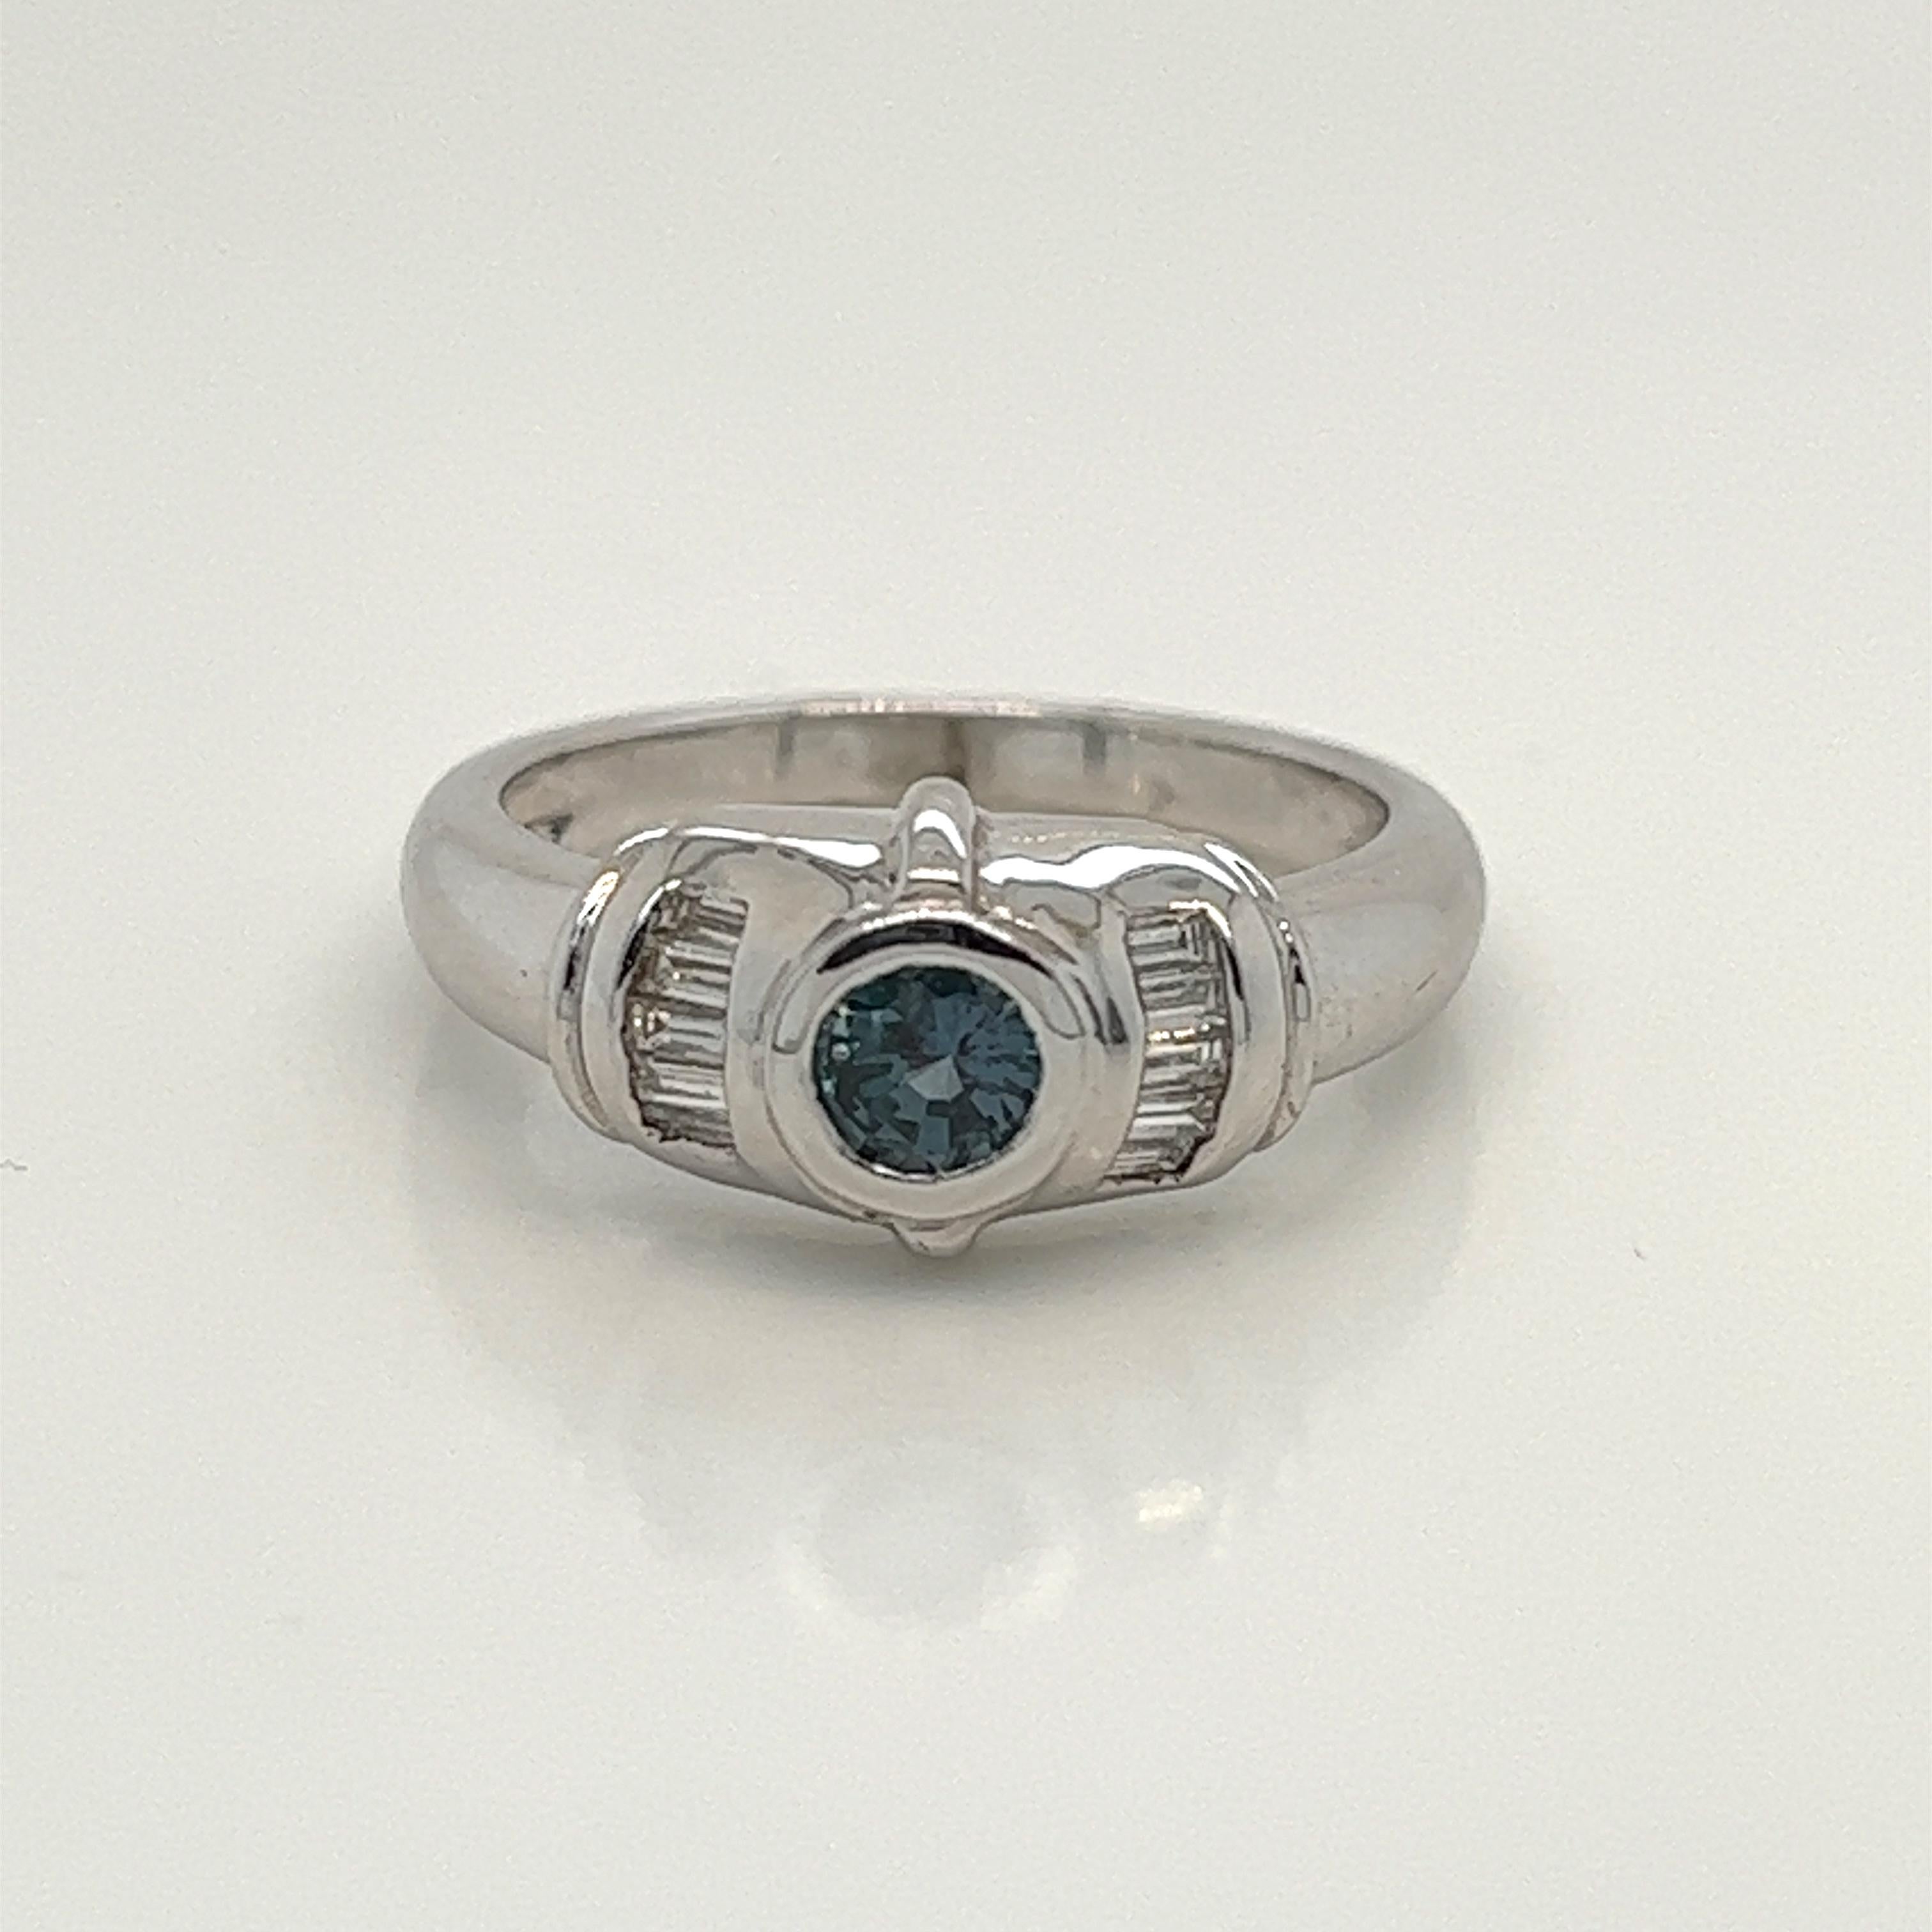 This is a gorgeous natural AAA quality Round Alexandrite with Baguette diamonds that is set in solid 18K white gold. This ring features a natural 0.53 carat round alexandrite that is certified by the Gemological Institute of America (GIA). The ring